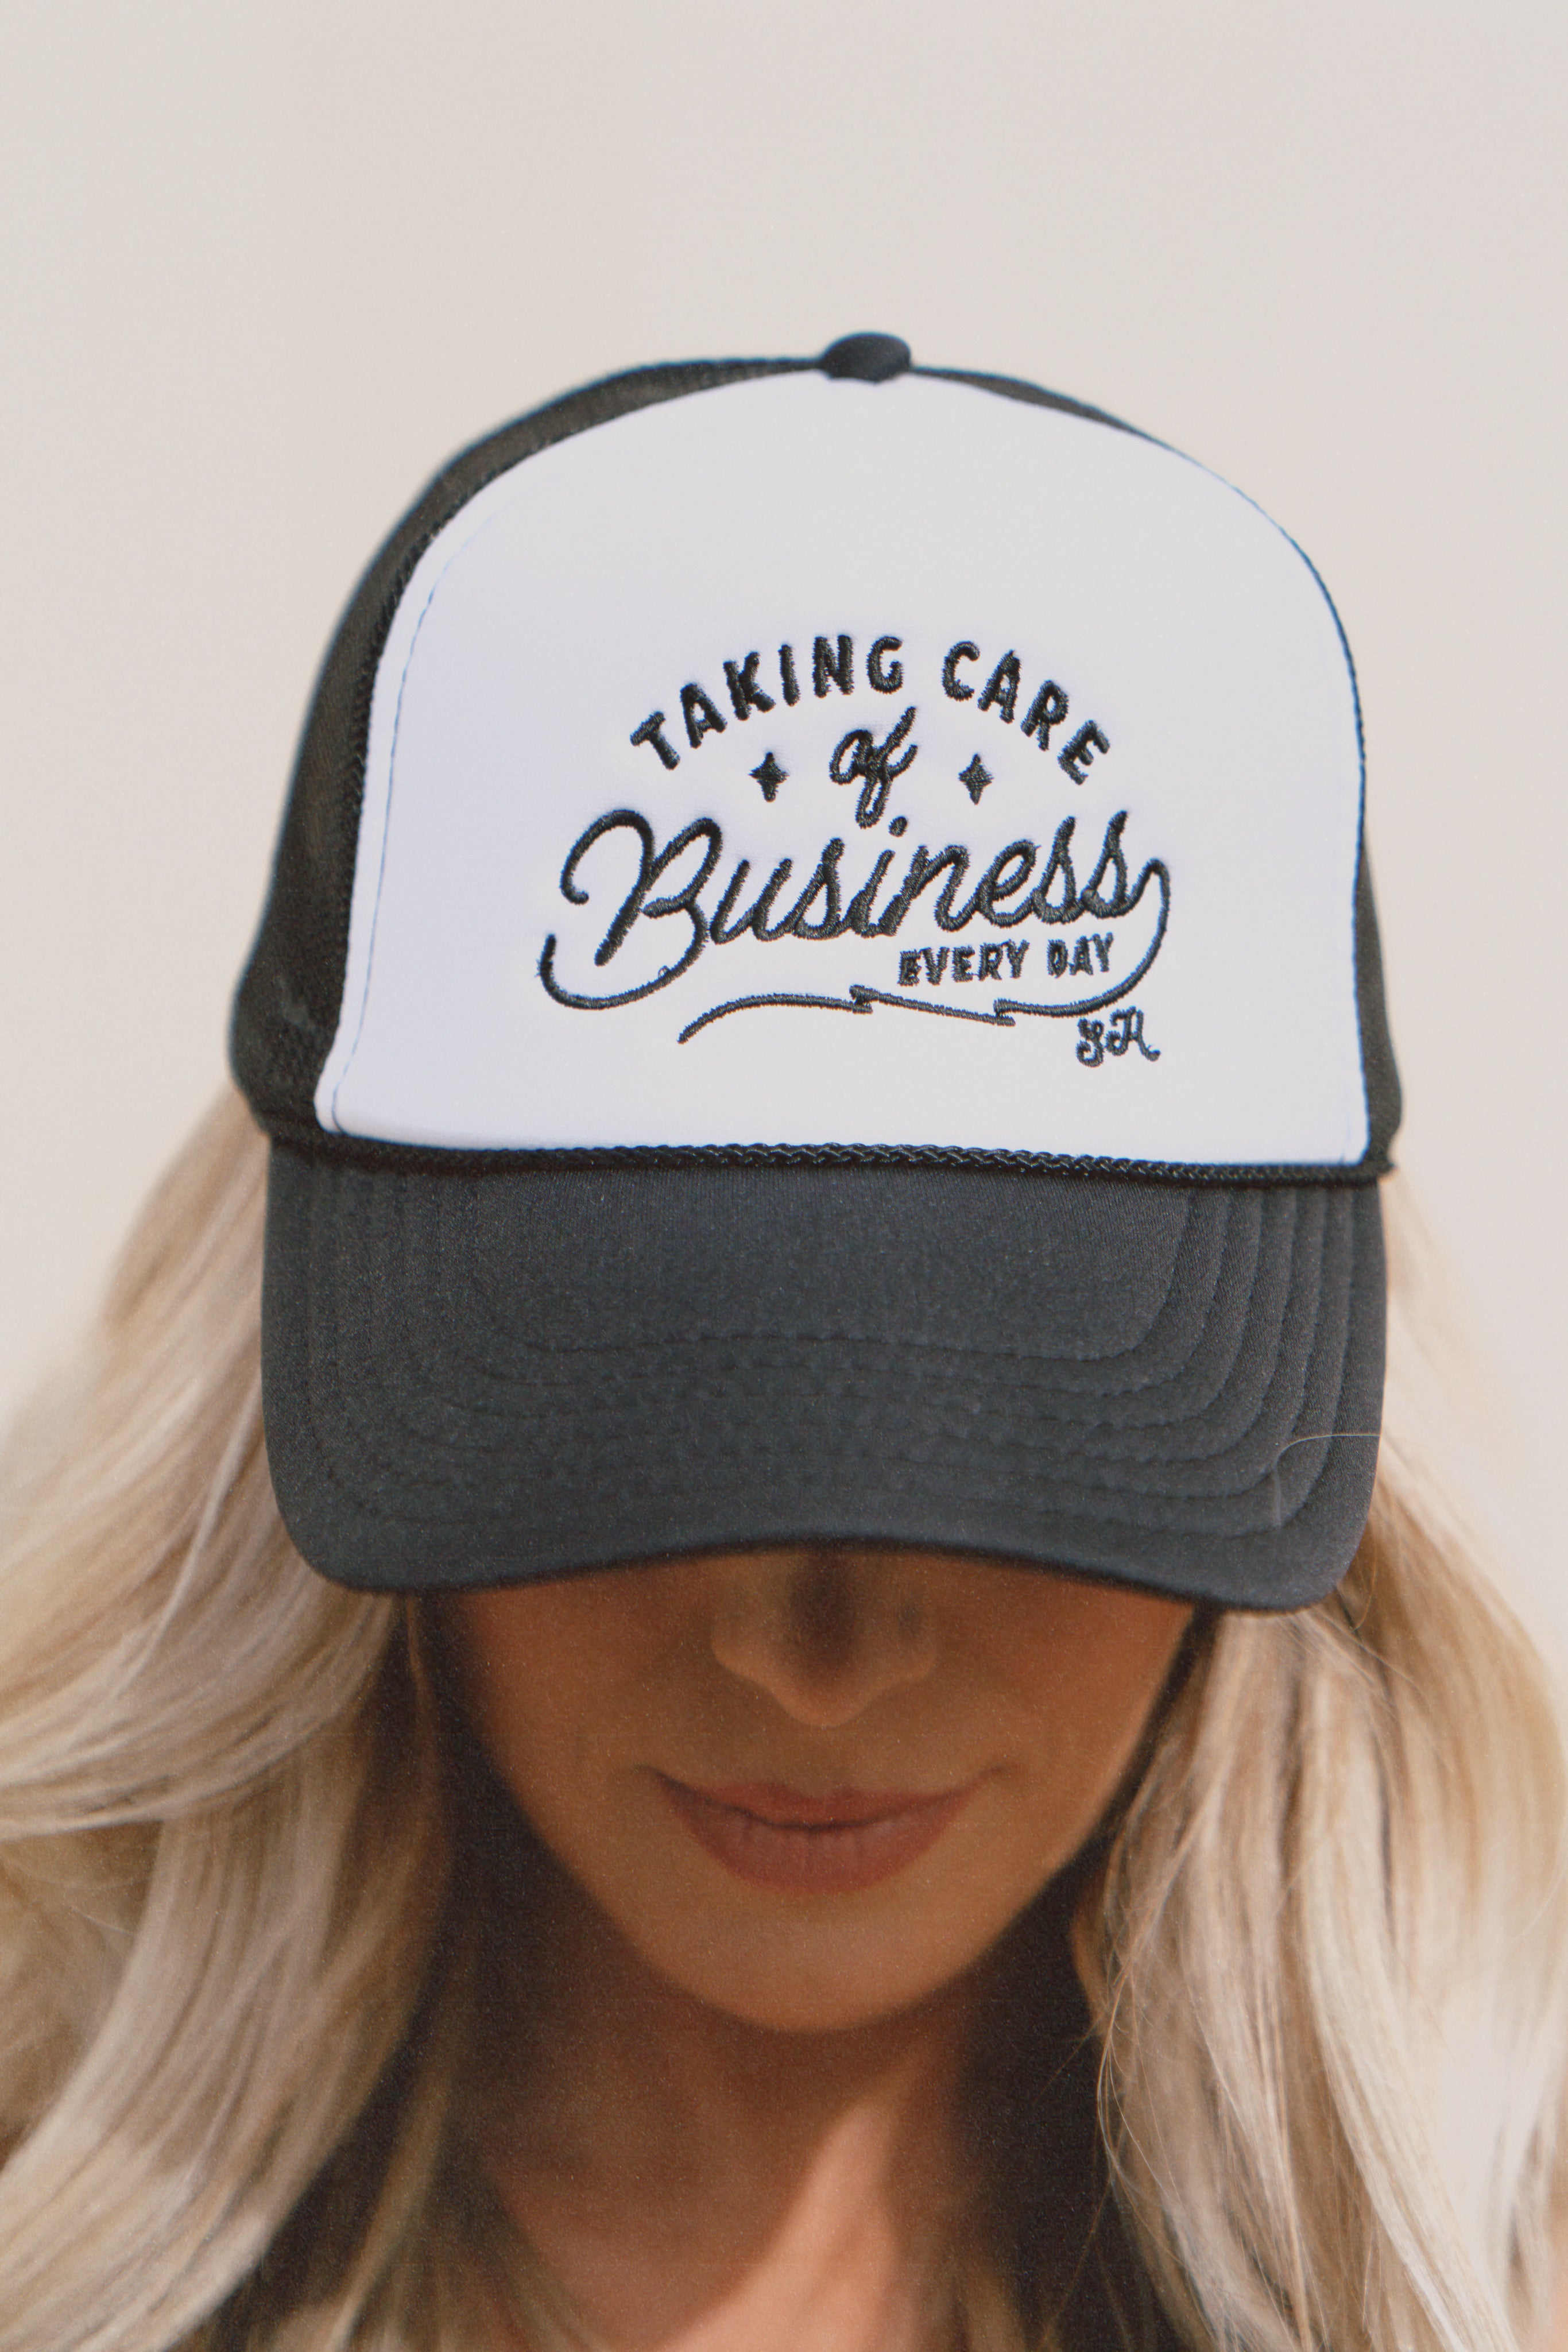 TRUCKER HAT: TAKING CARE OF BUSINESS